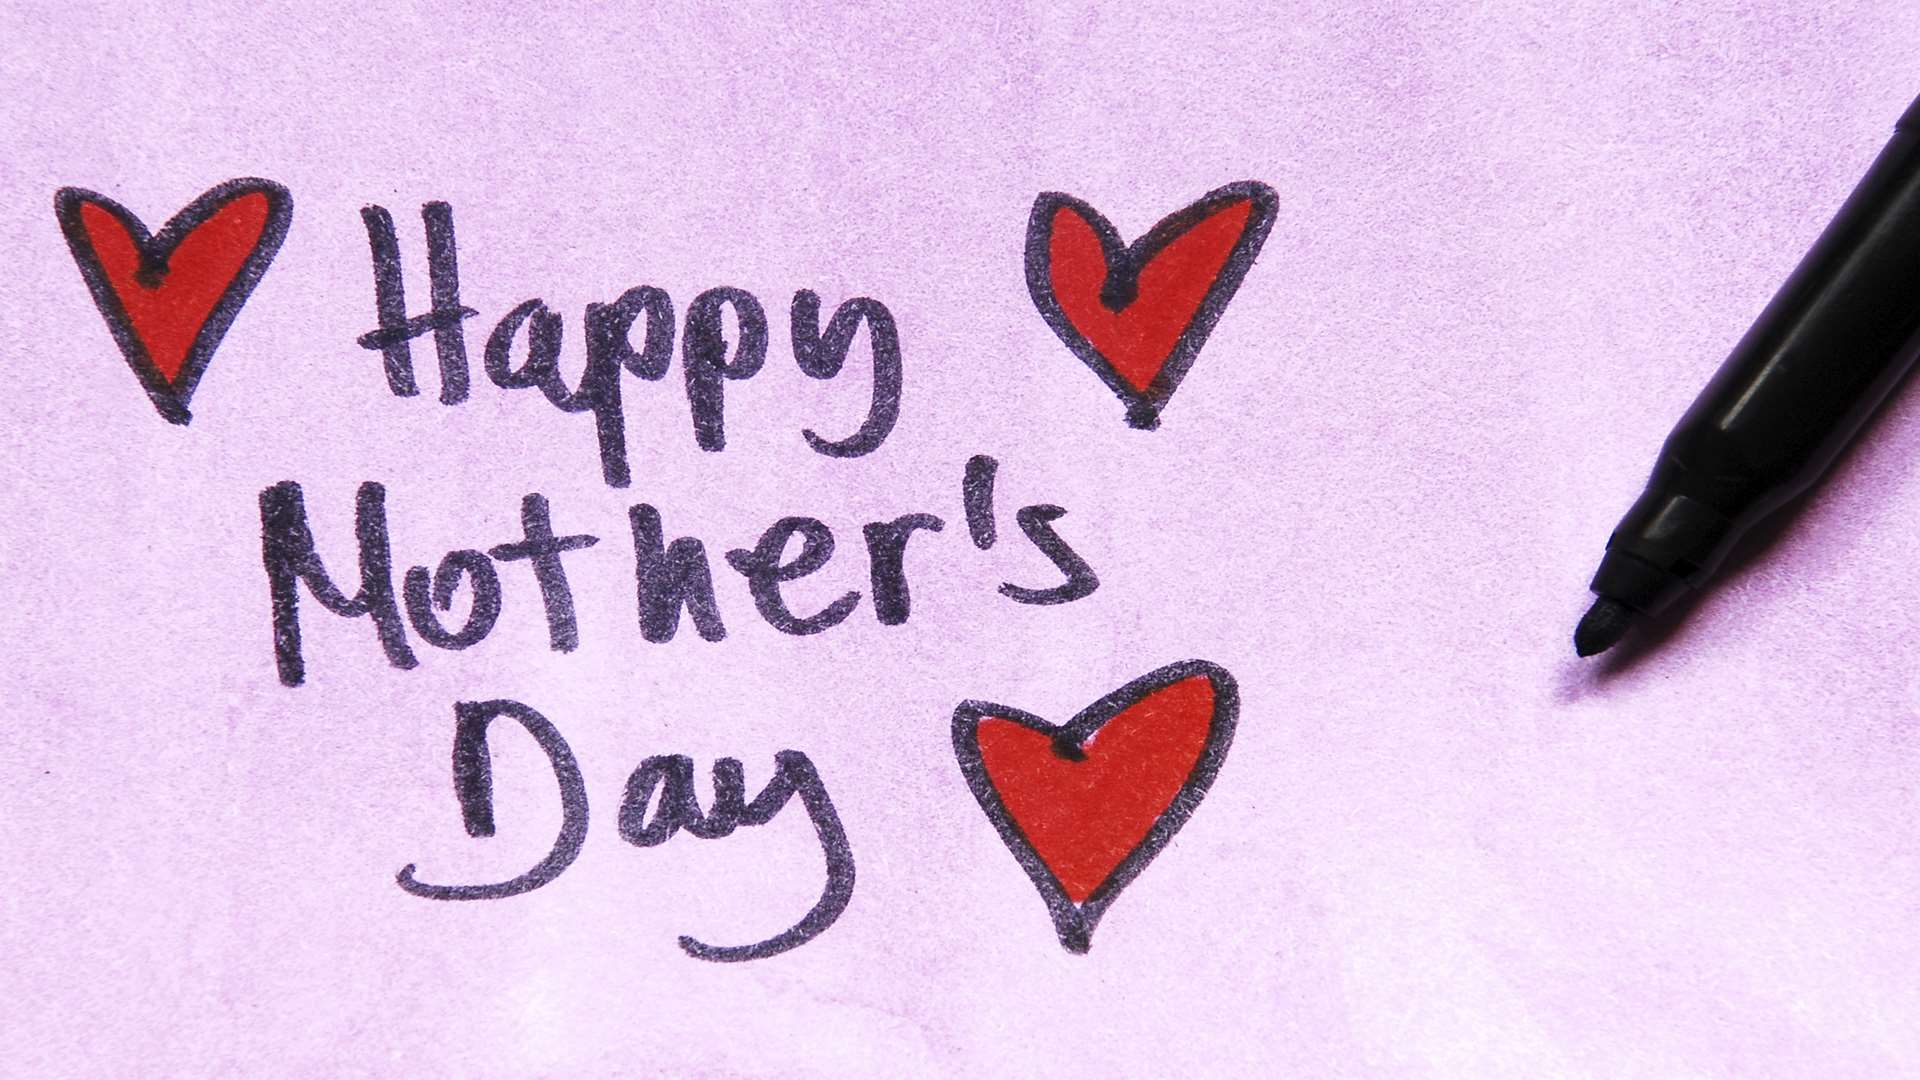 Mother's Day is on Sunday, March 15